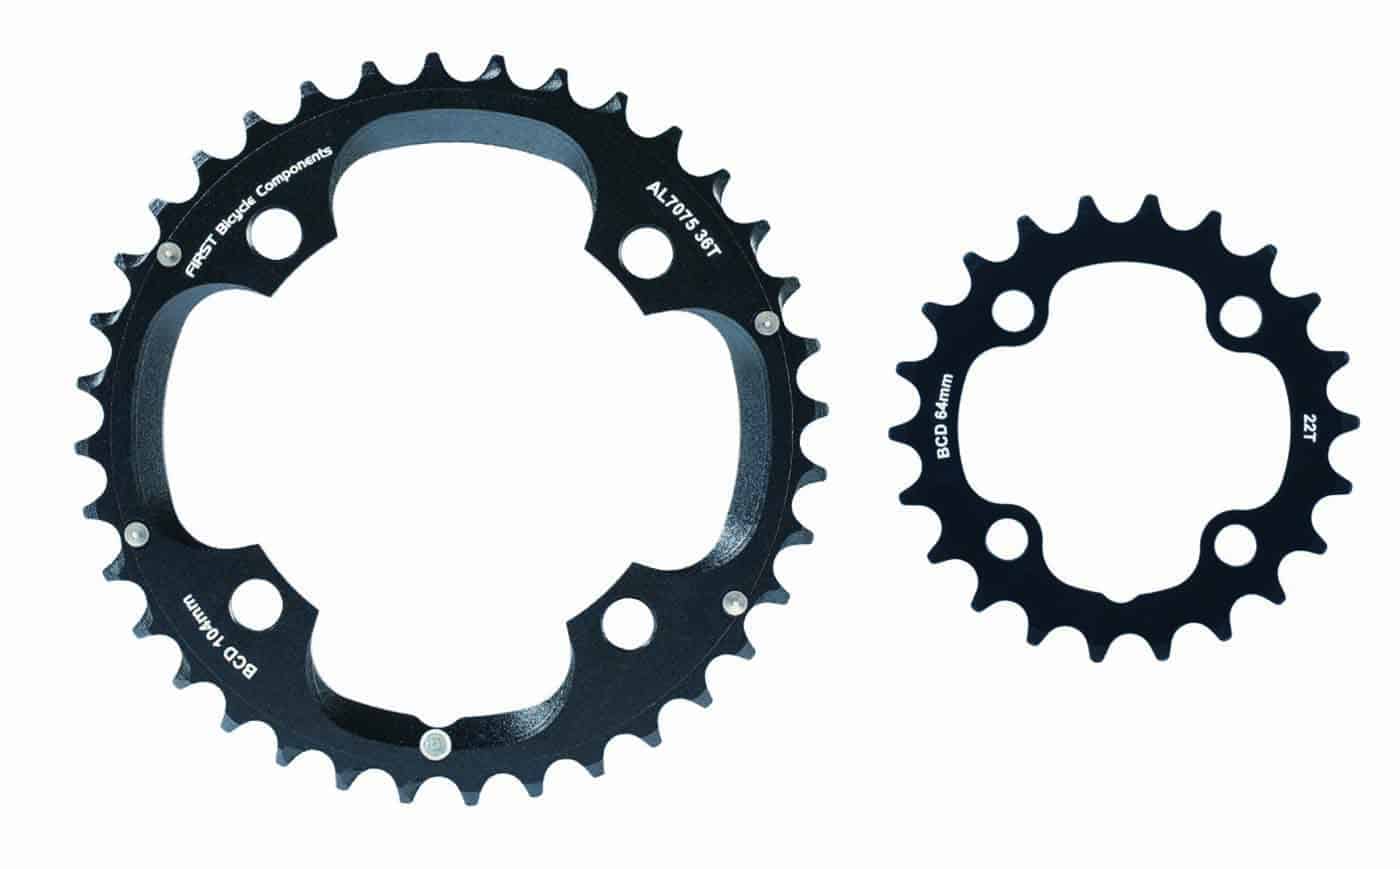 96MM 32T 34T 36T Bike Narrow Wide Round Chainring Repair Single Chain Ring for Mountain Bicycle Chainring Bike